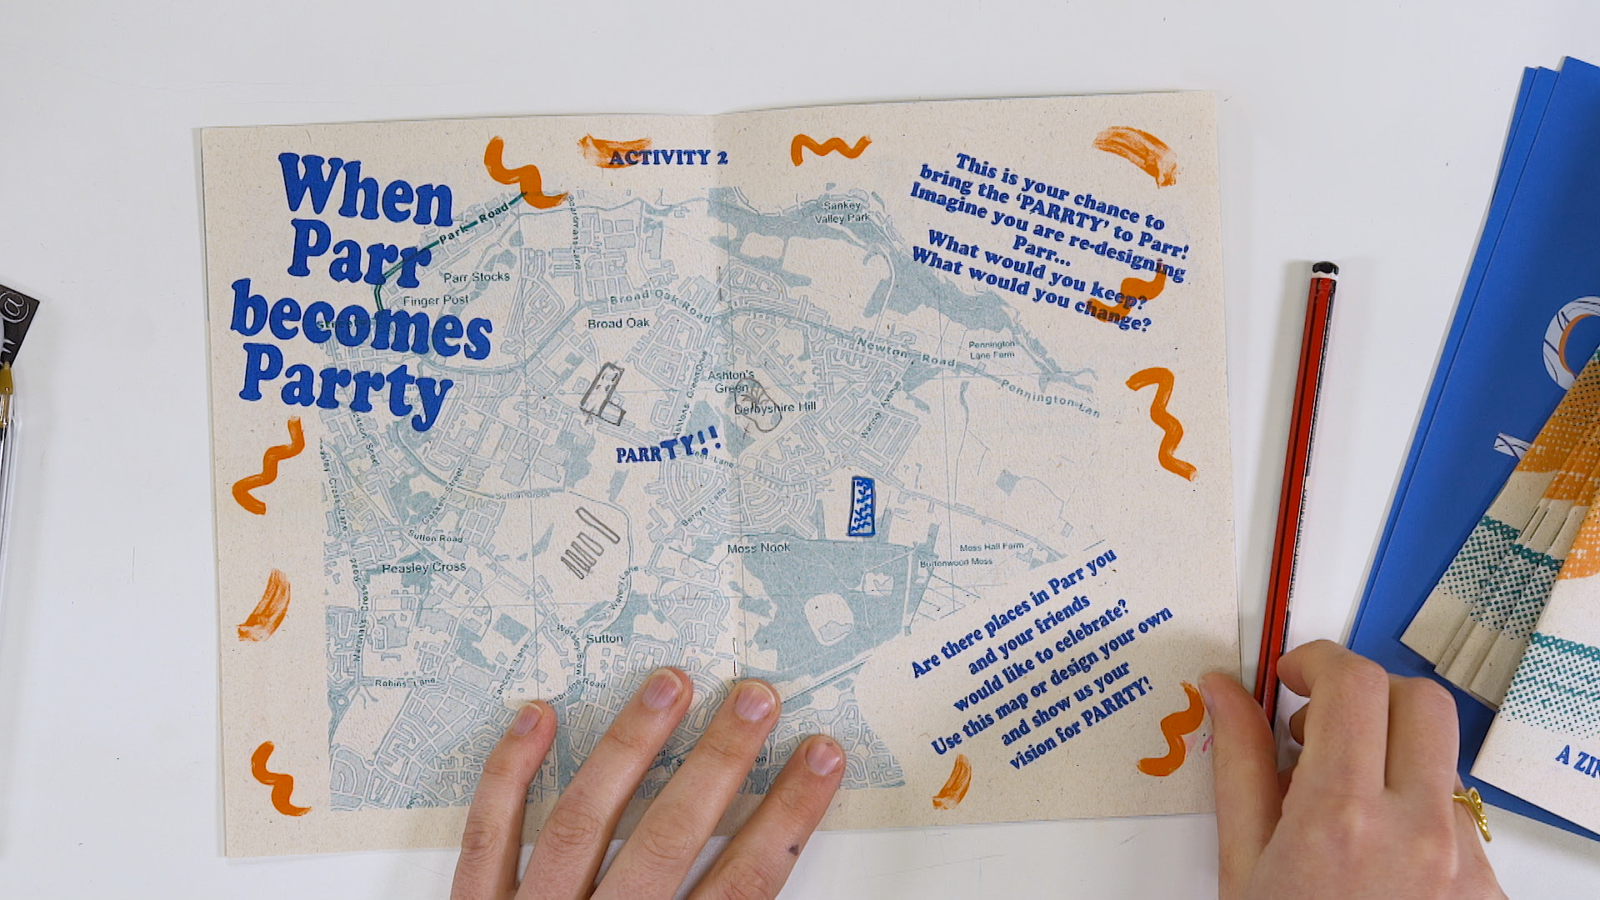 An open page spread of the Parrty Zine showing a map of the Parr area of St Helens.